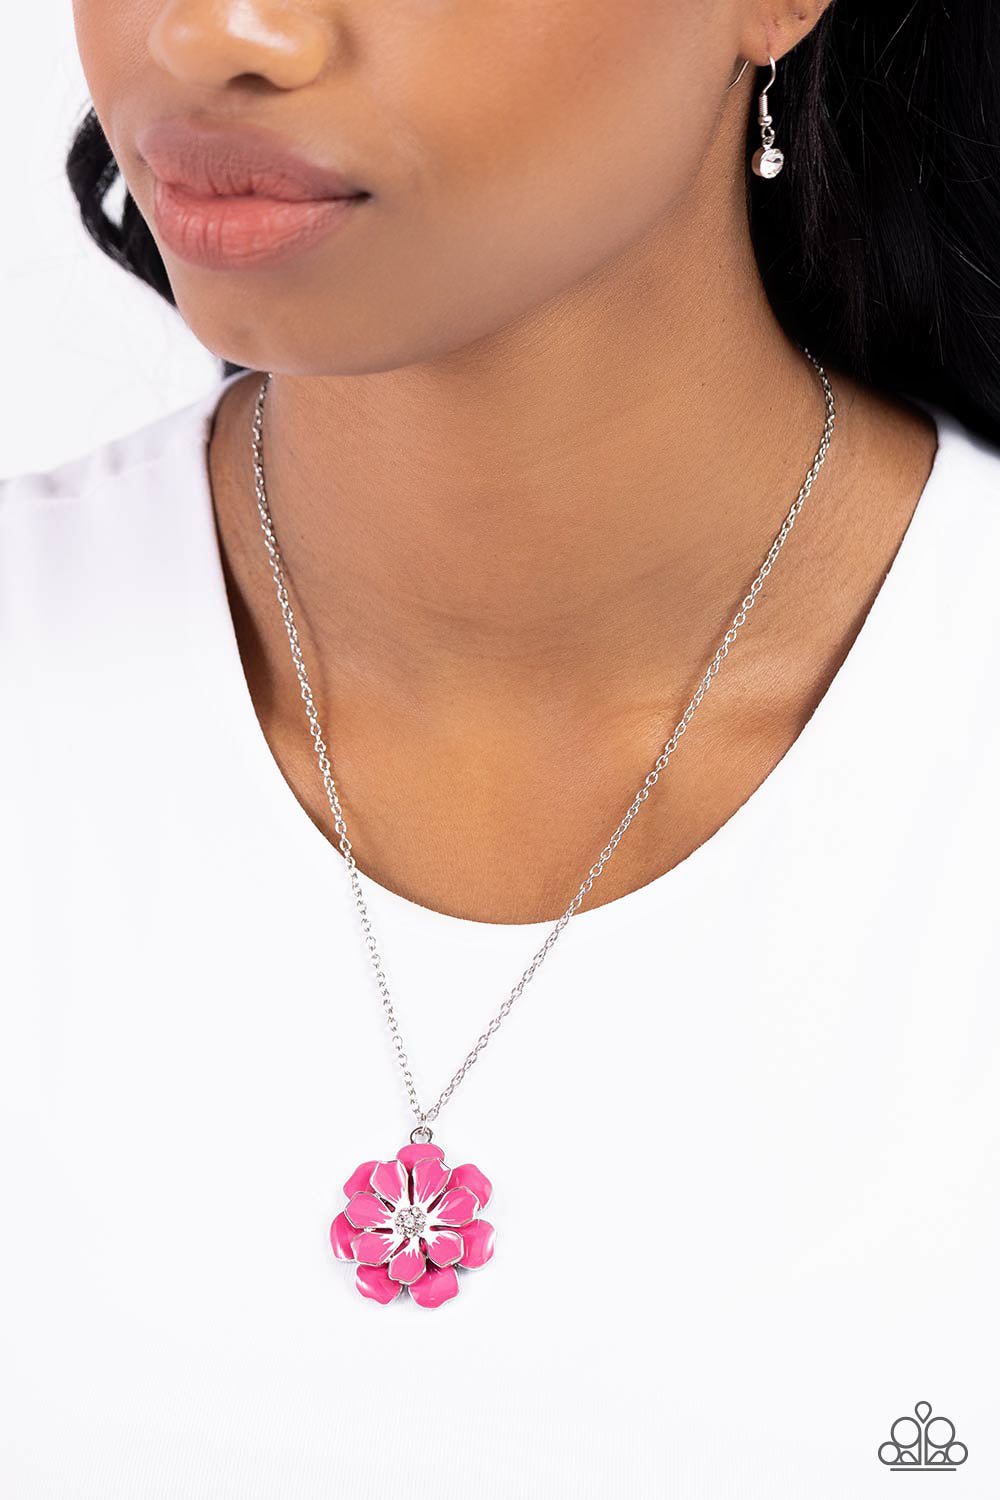 Beyond Blooming - Pink necklace